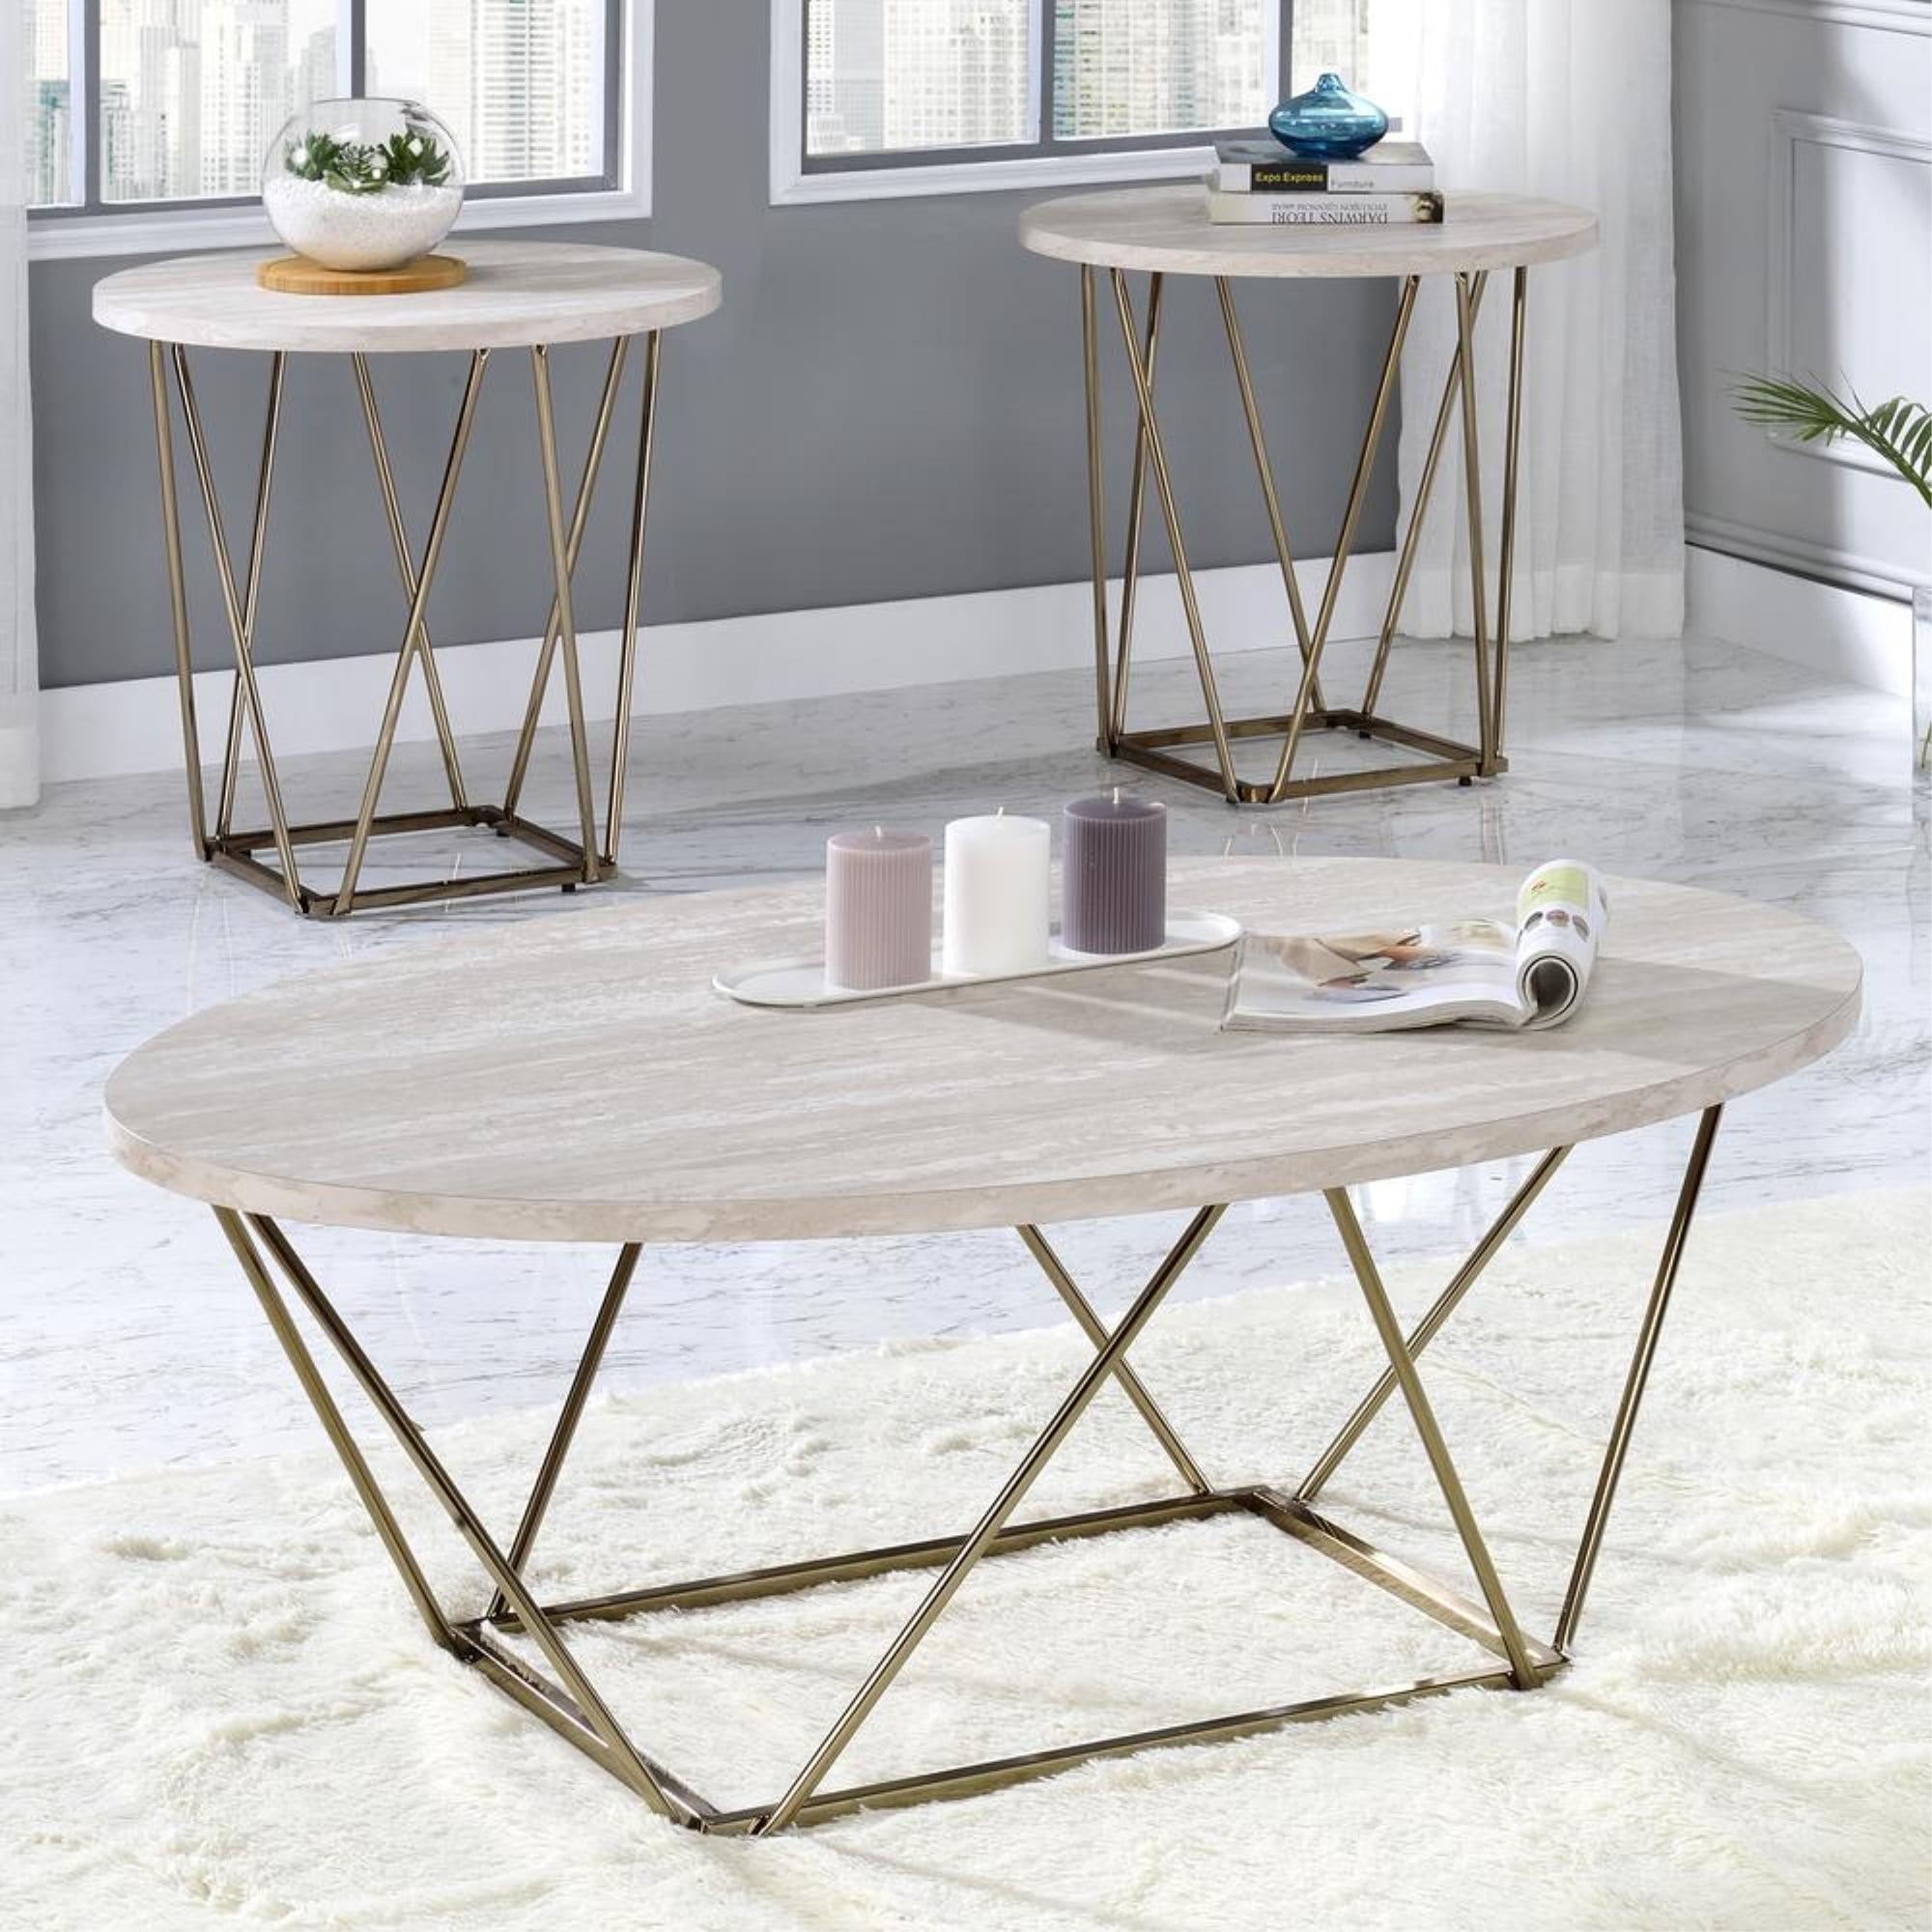 Champagne Gold and White Oval Coffee Table with Faux Marble Top